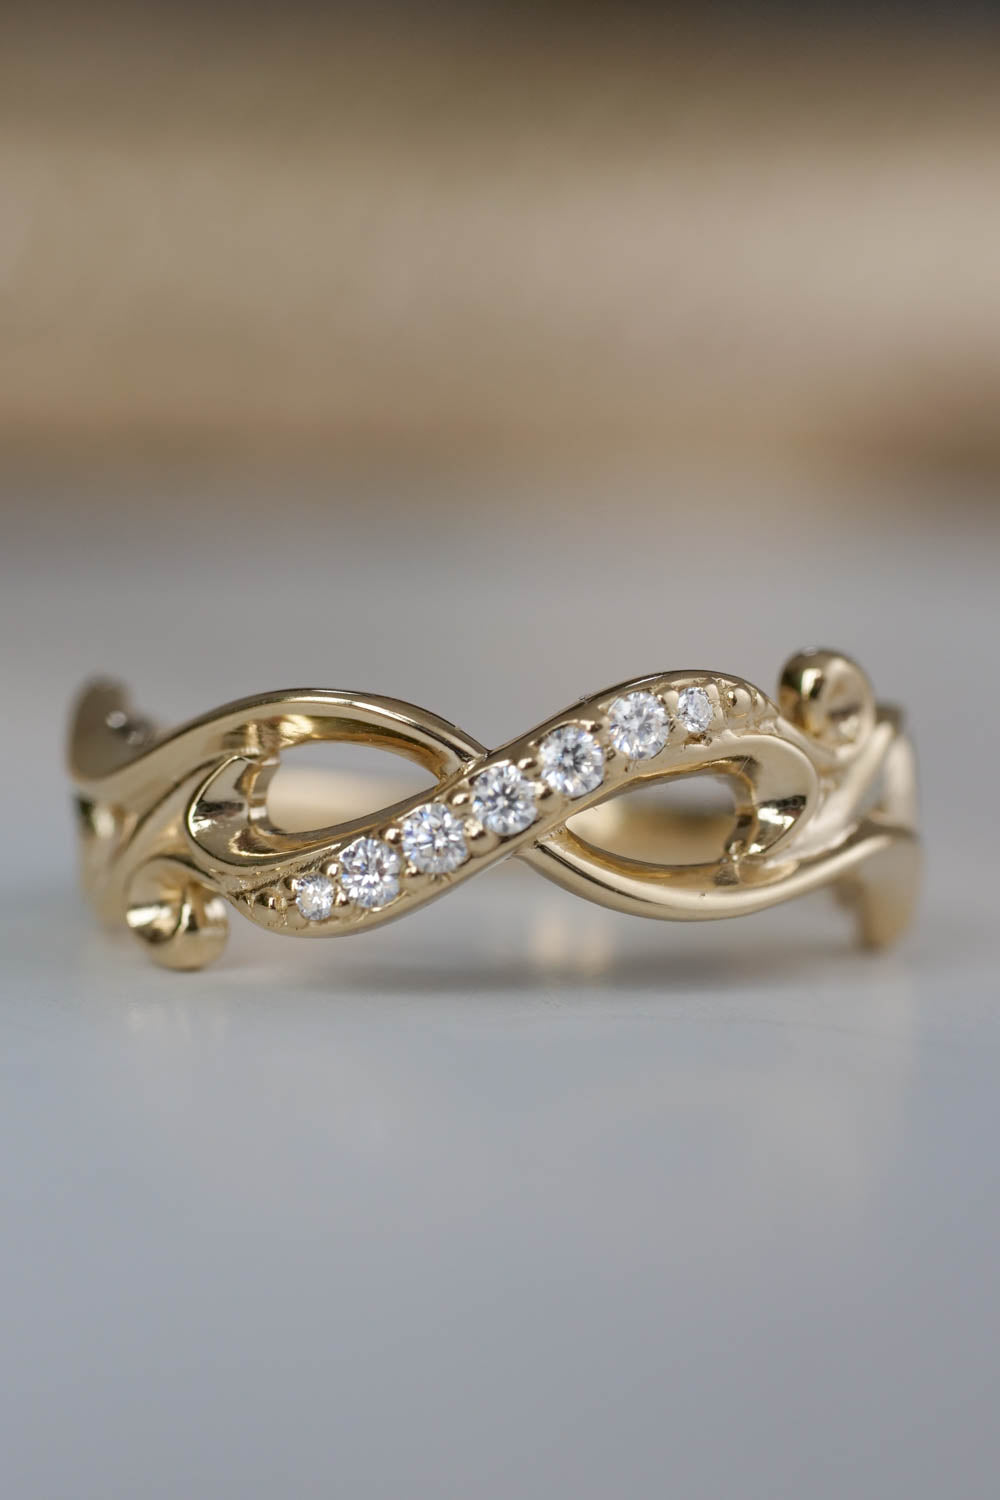 22K Gold Lightweight Infinity Ring (2.05G) - Queen of Hearts Jewelry